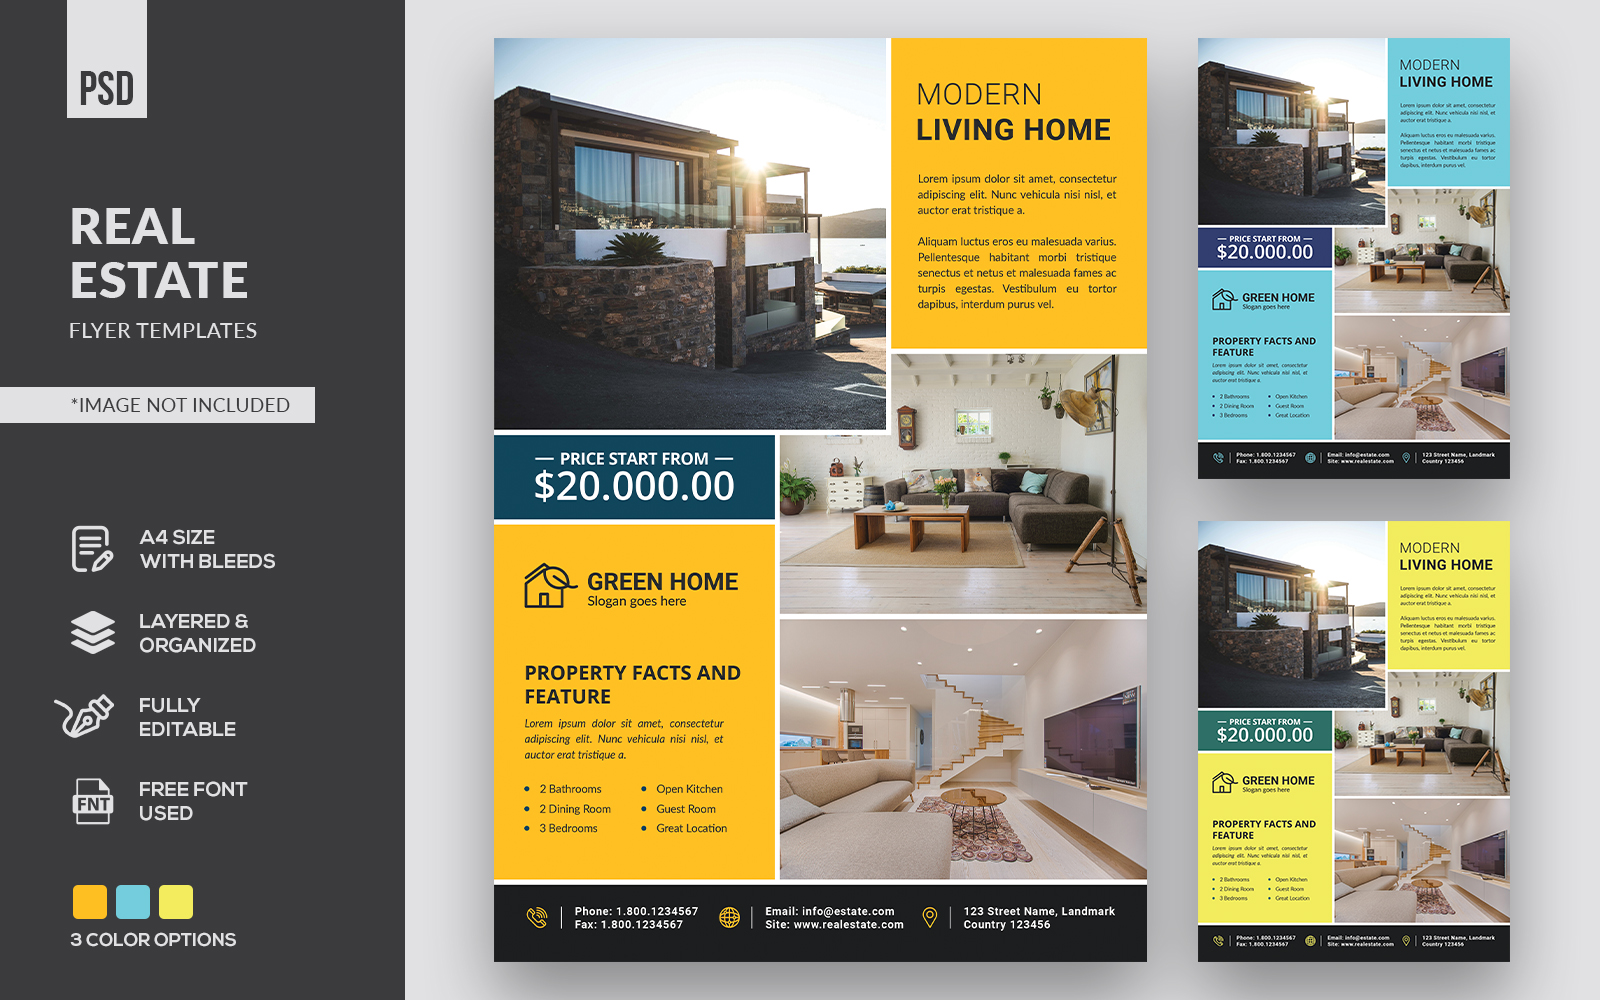 Real Estate Flyers - Corporate Identity Template